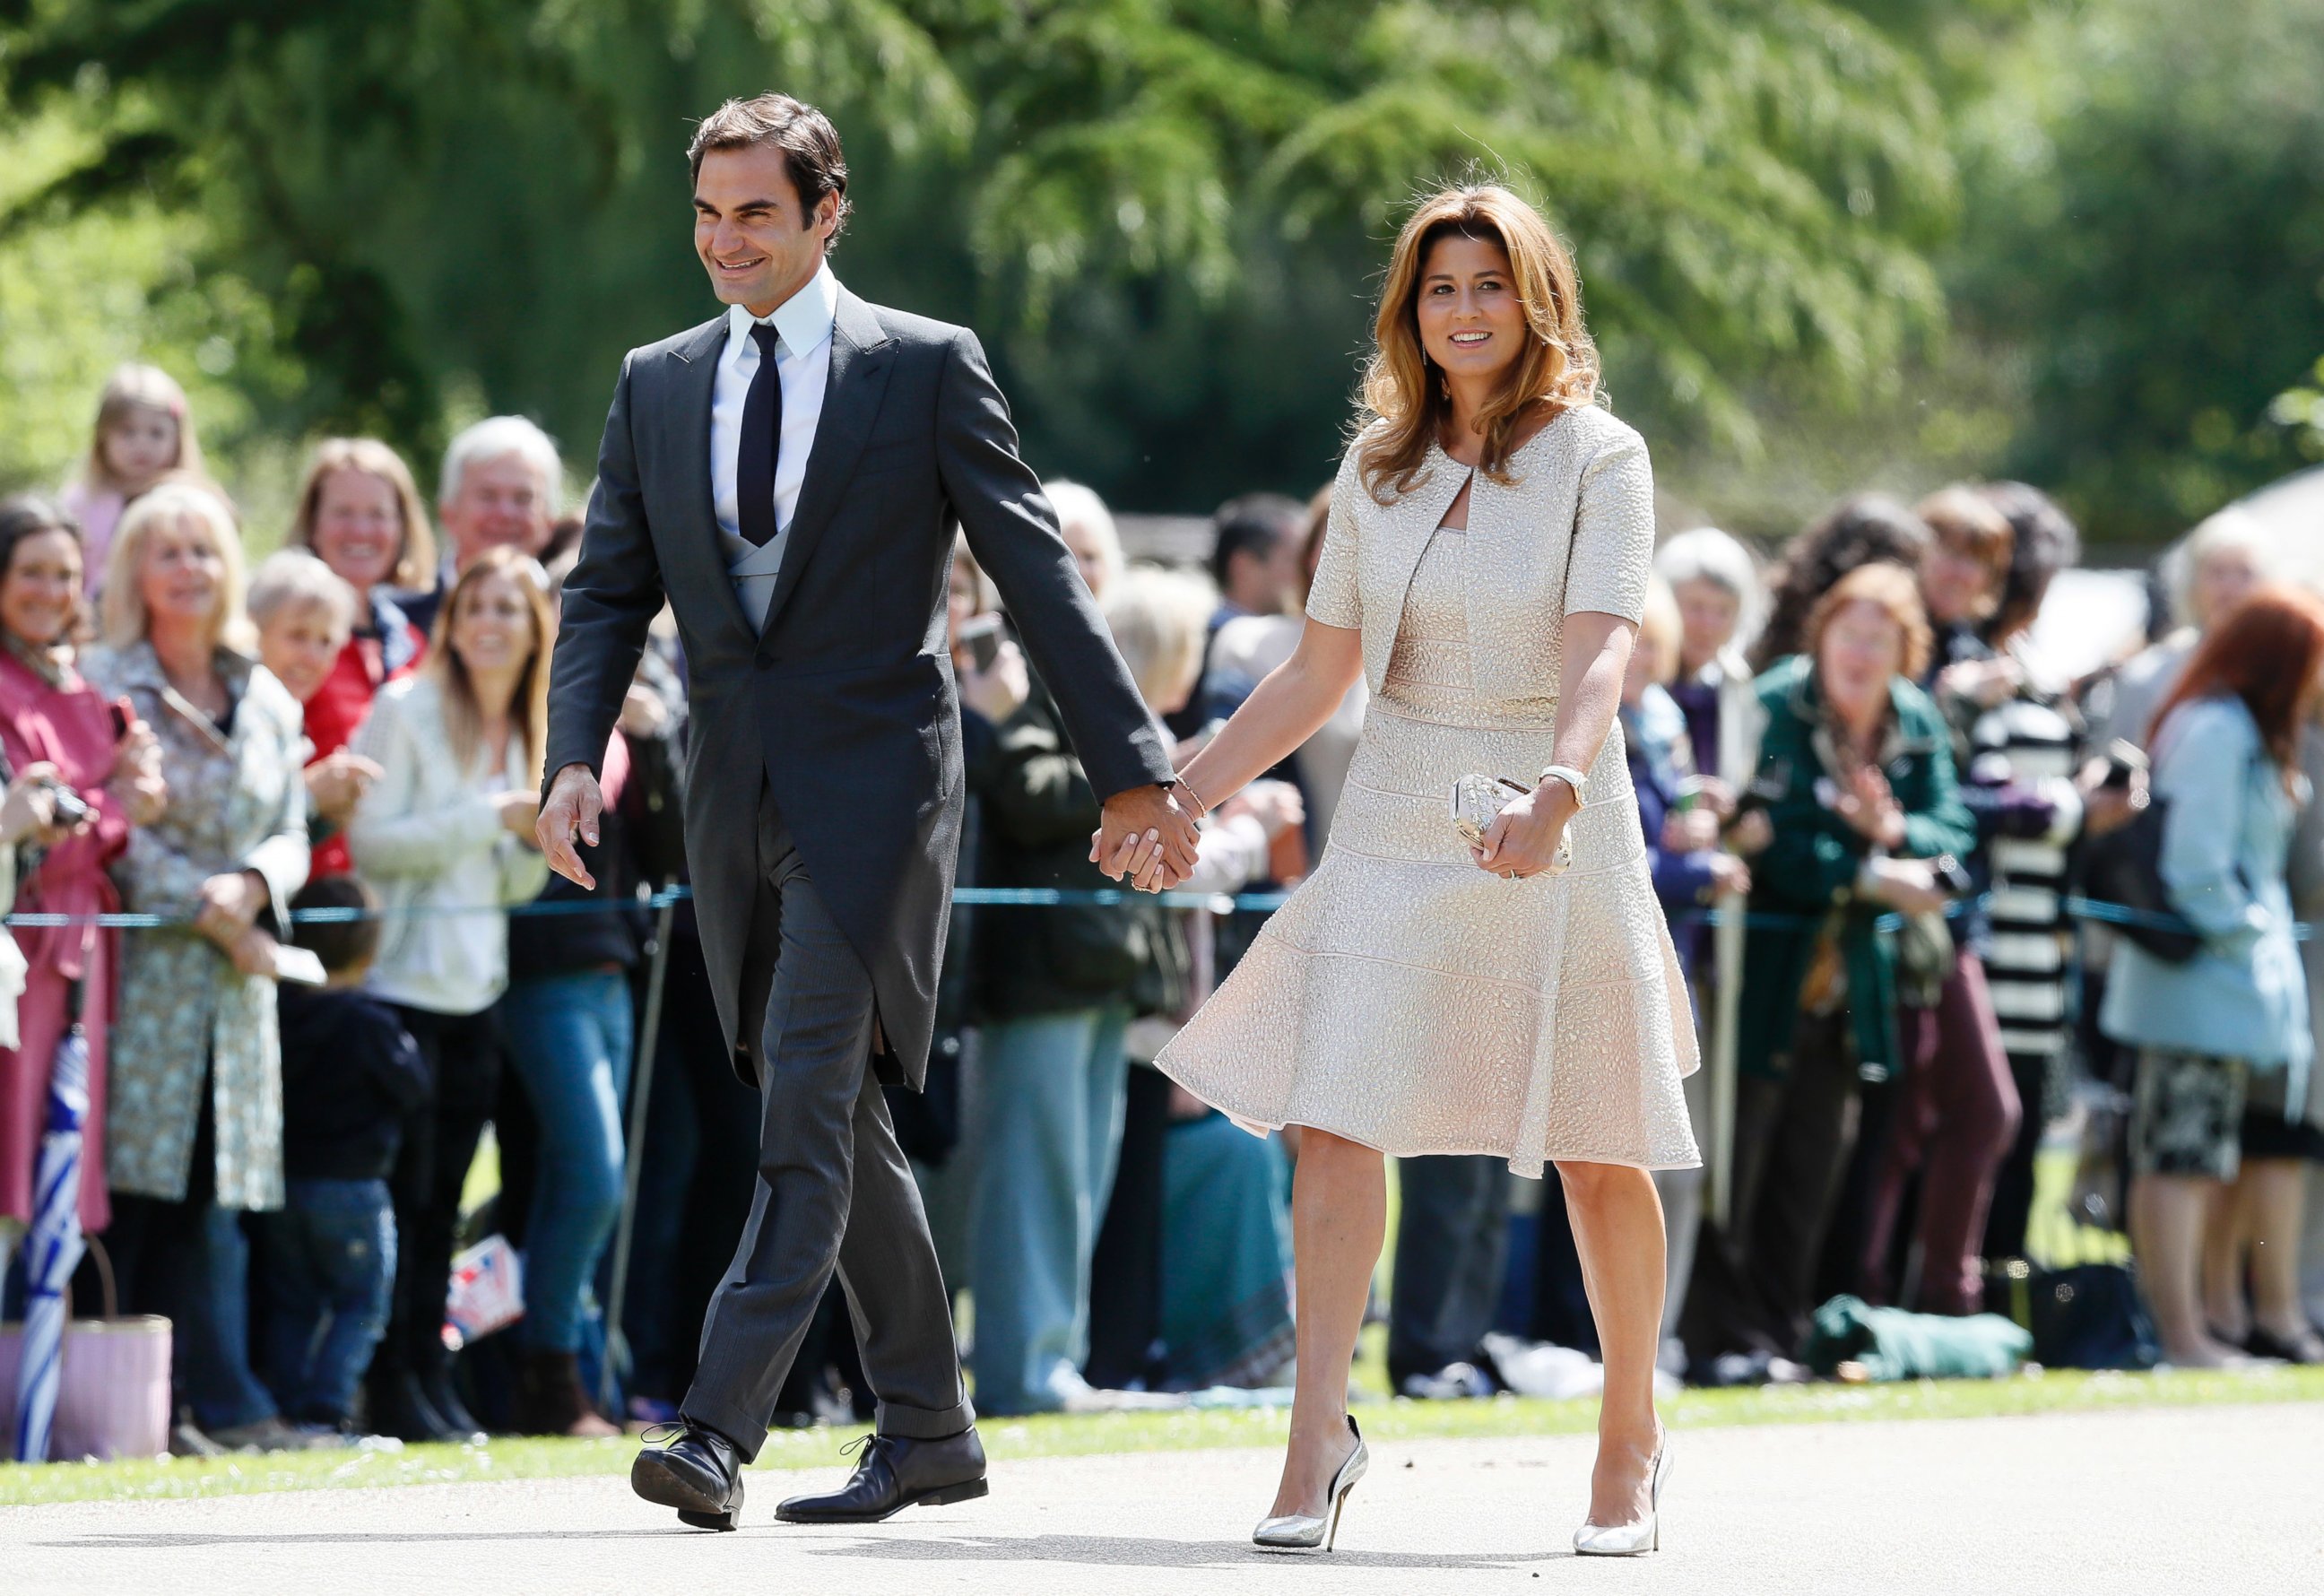 PHOTO: Swiss tennis player Roger Federer and his wife Mirka arrive at St Mark's Church in Englefield, England, ahead of the wedding of Pippa Middleton and James Matthews, May 20, 2017.